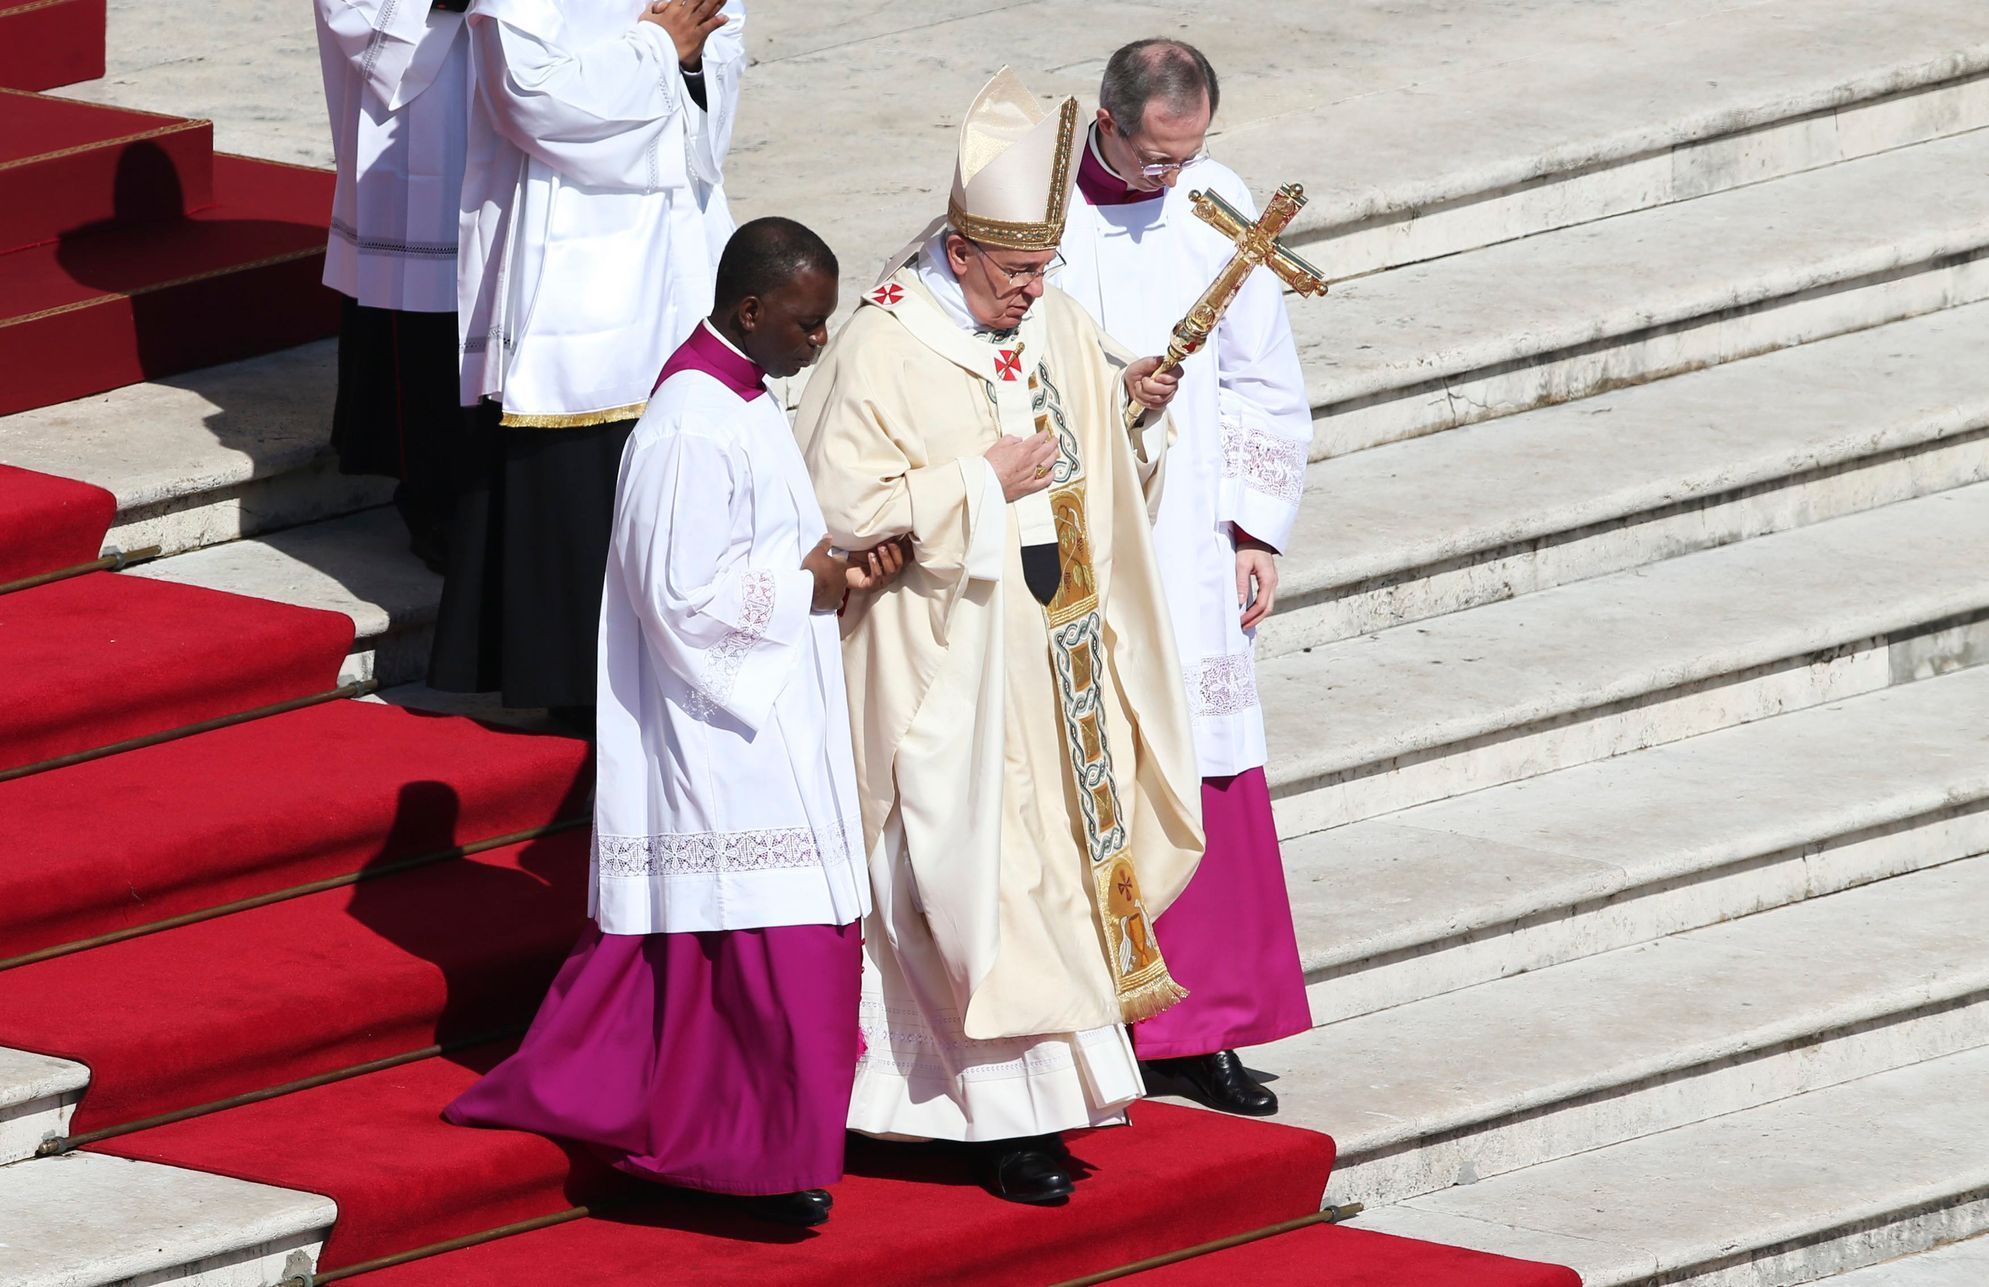 Pope Francis arrives to lead the Easter mass in Saint Peter's Square at the Vatican